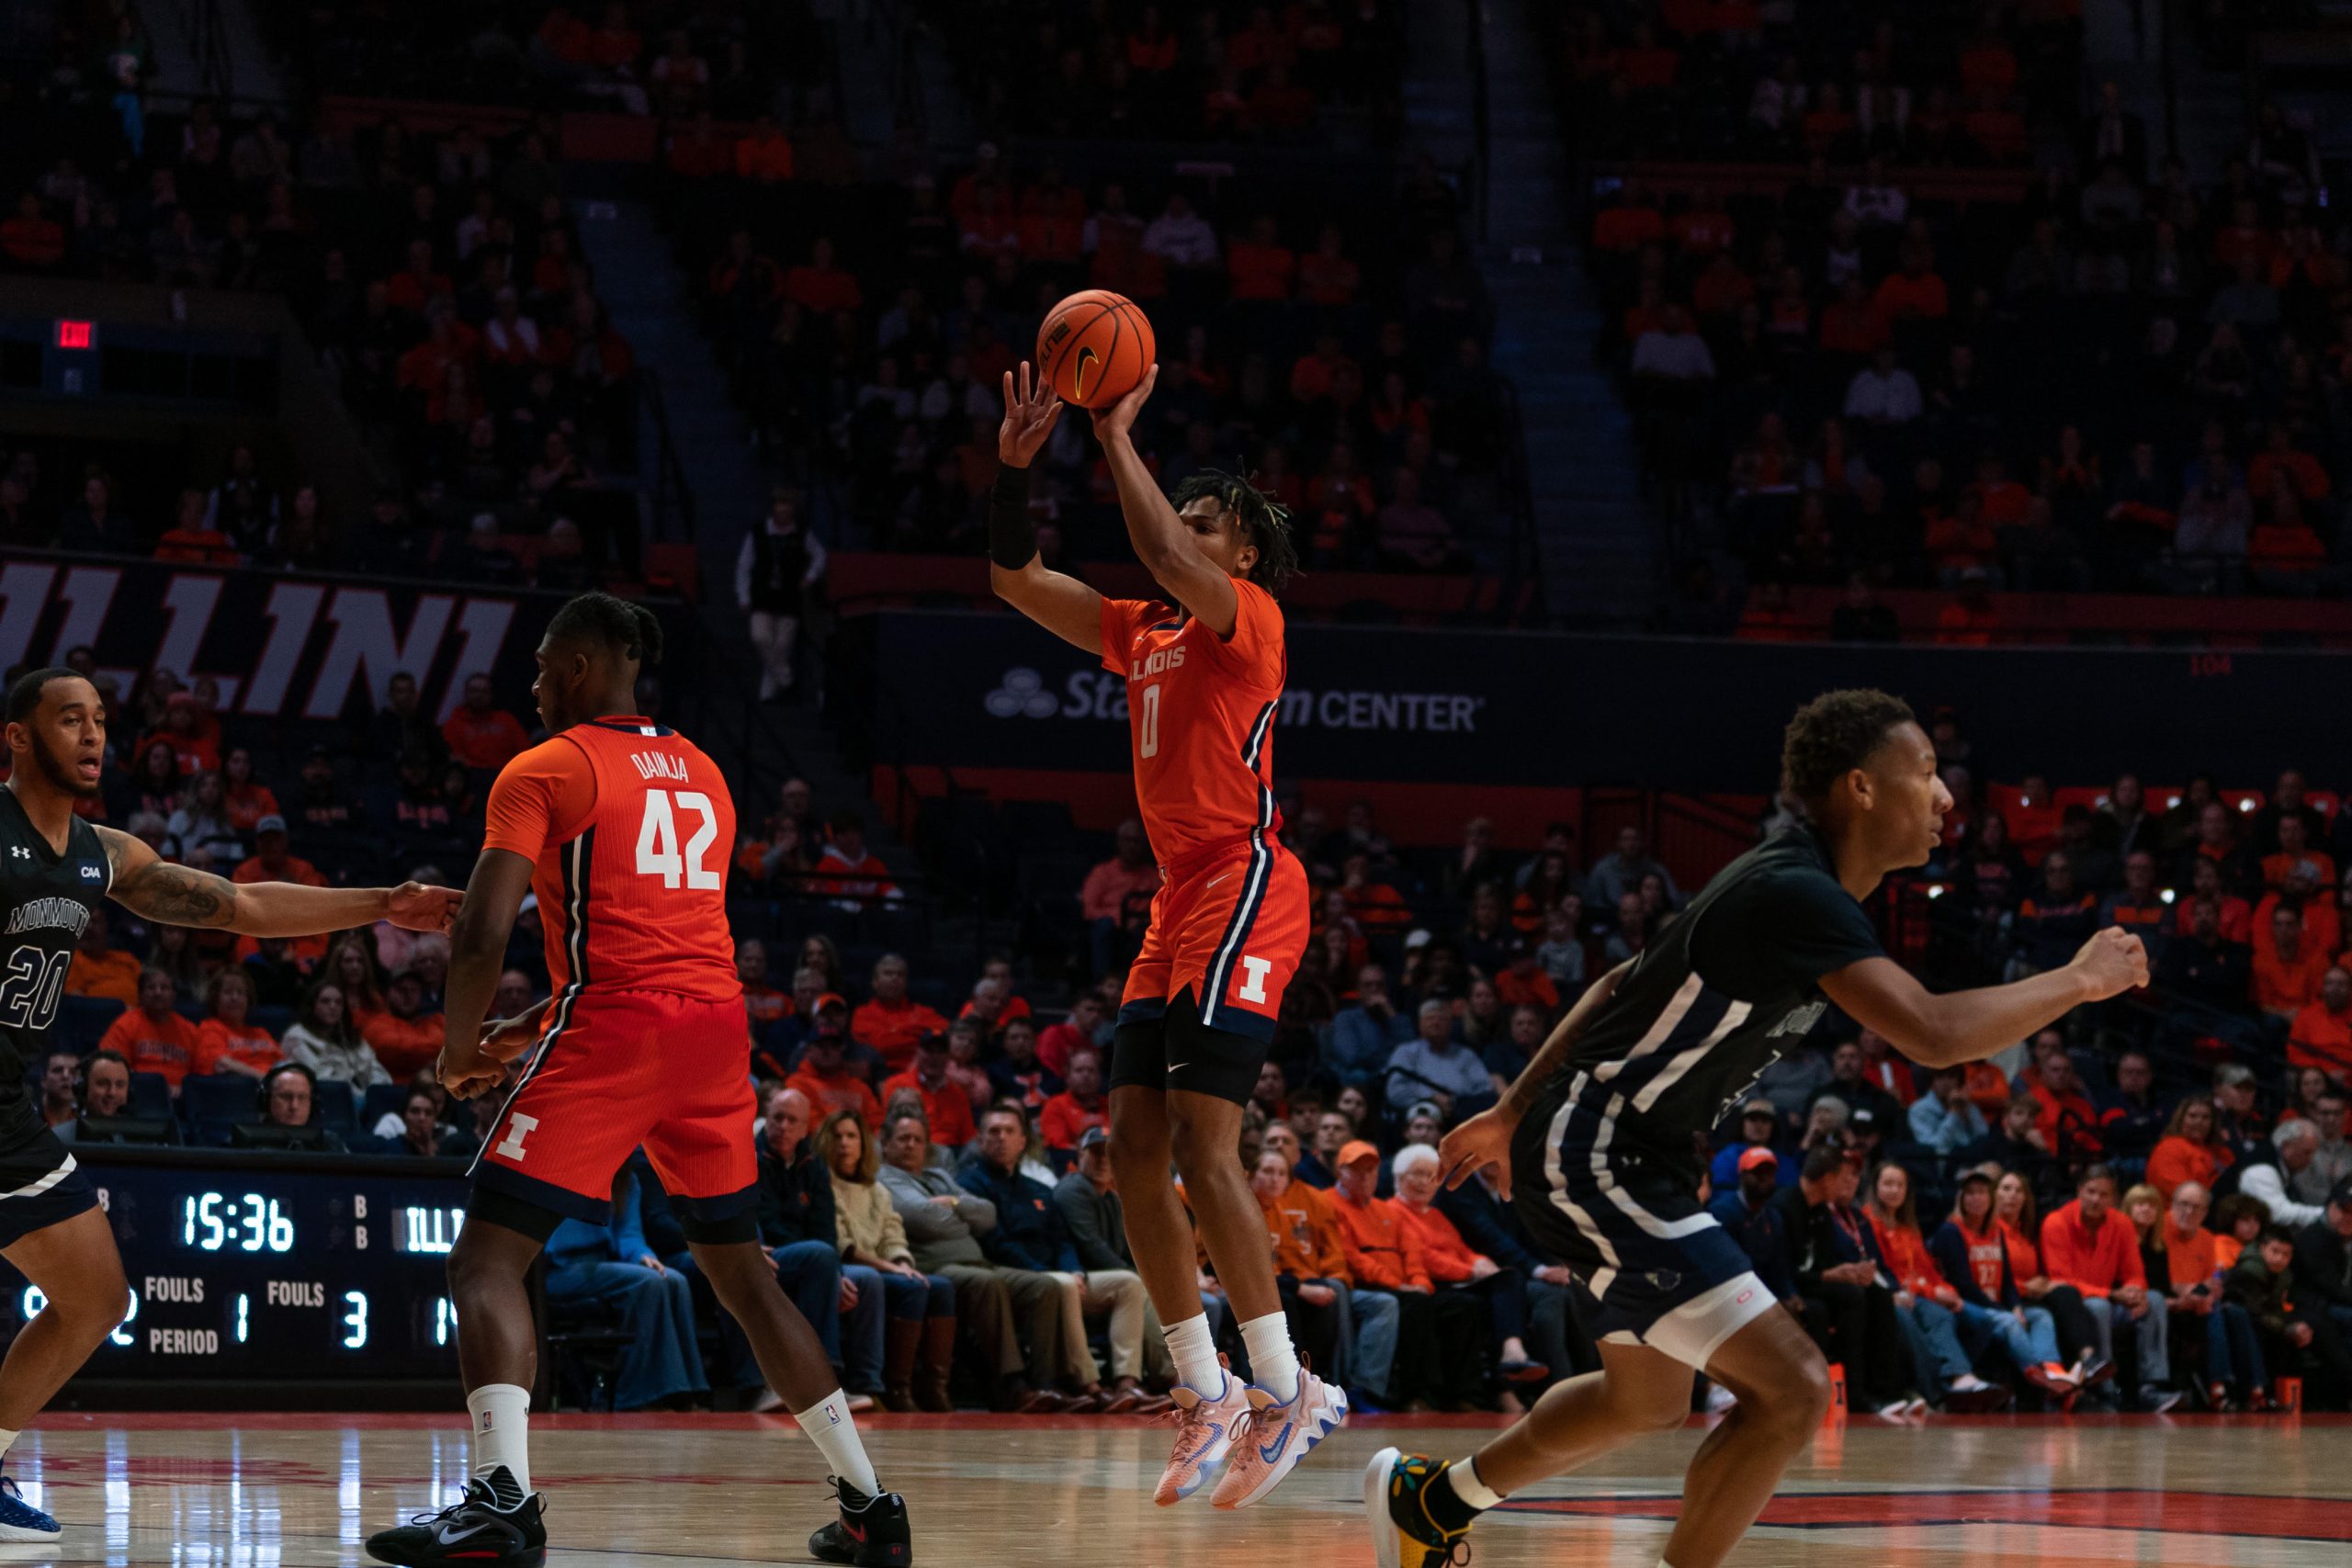 #19 Illini Make History With 103-65 Rout of Monmouth